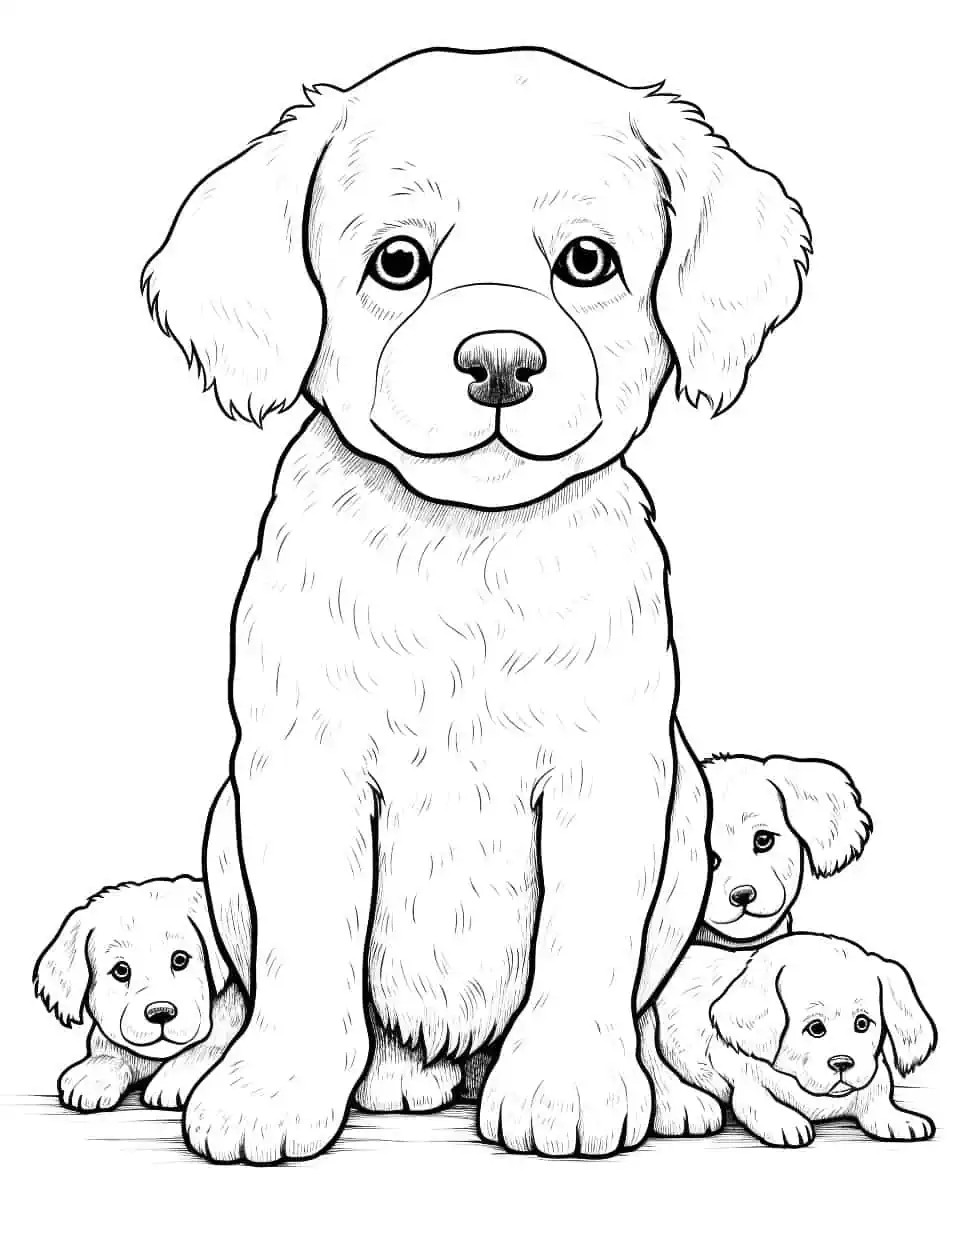 Poodle with Puppies Dog Coloring Page - A loving Poodle mother taking care of her playful puppies.